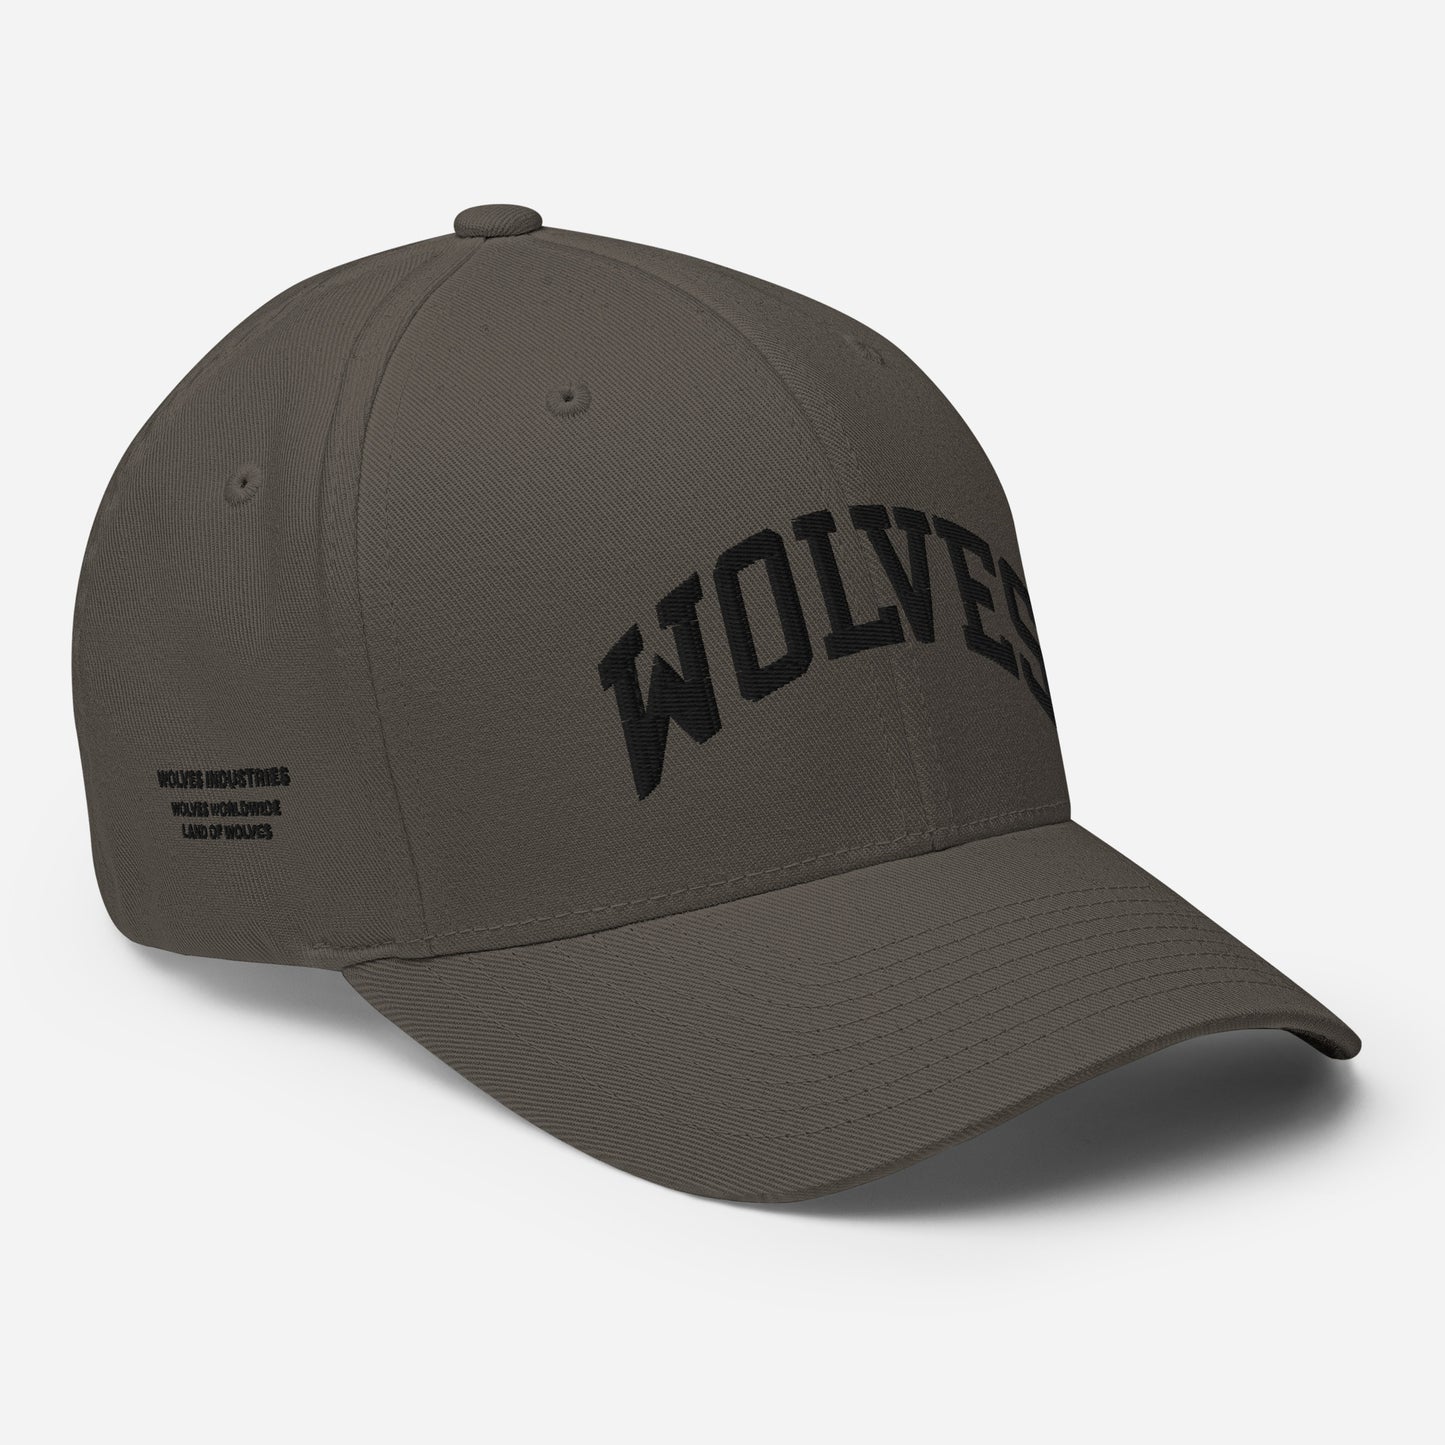 Wolves Industries DGH Structured Twill Cap